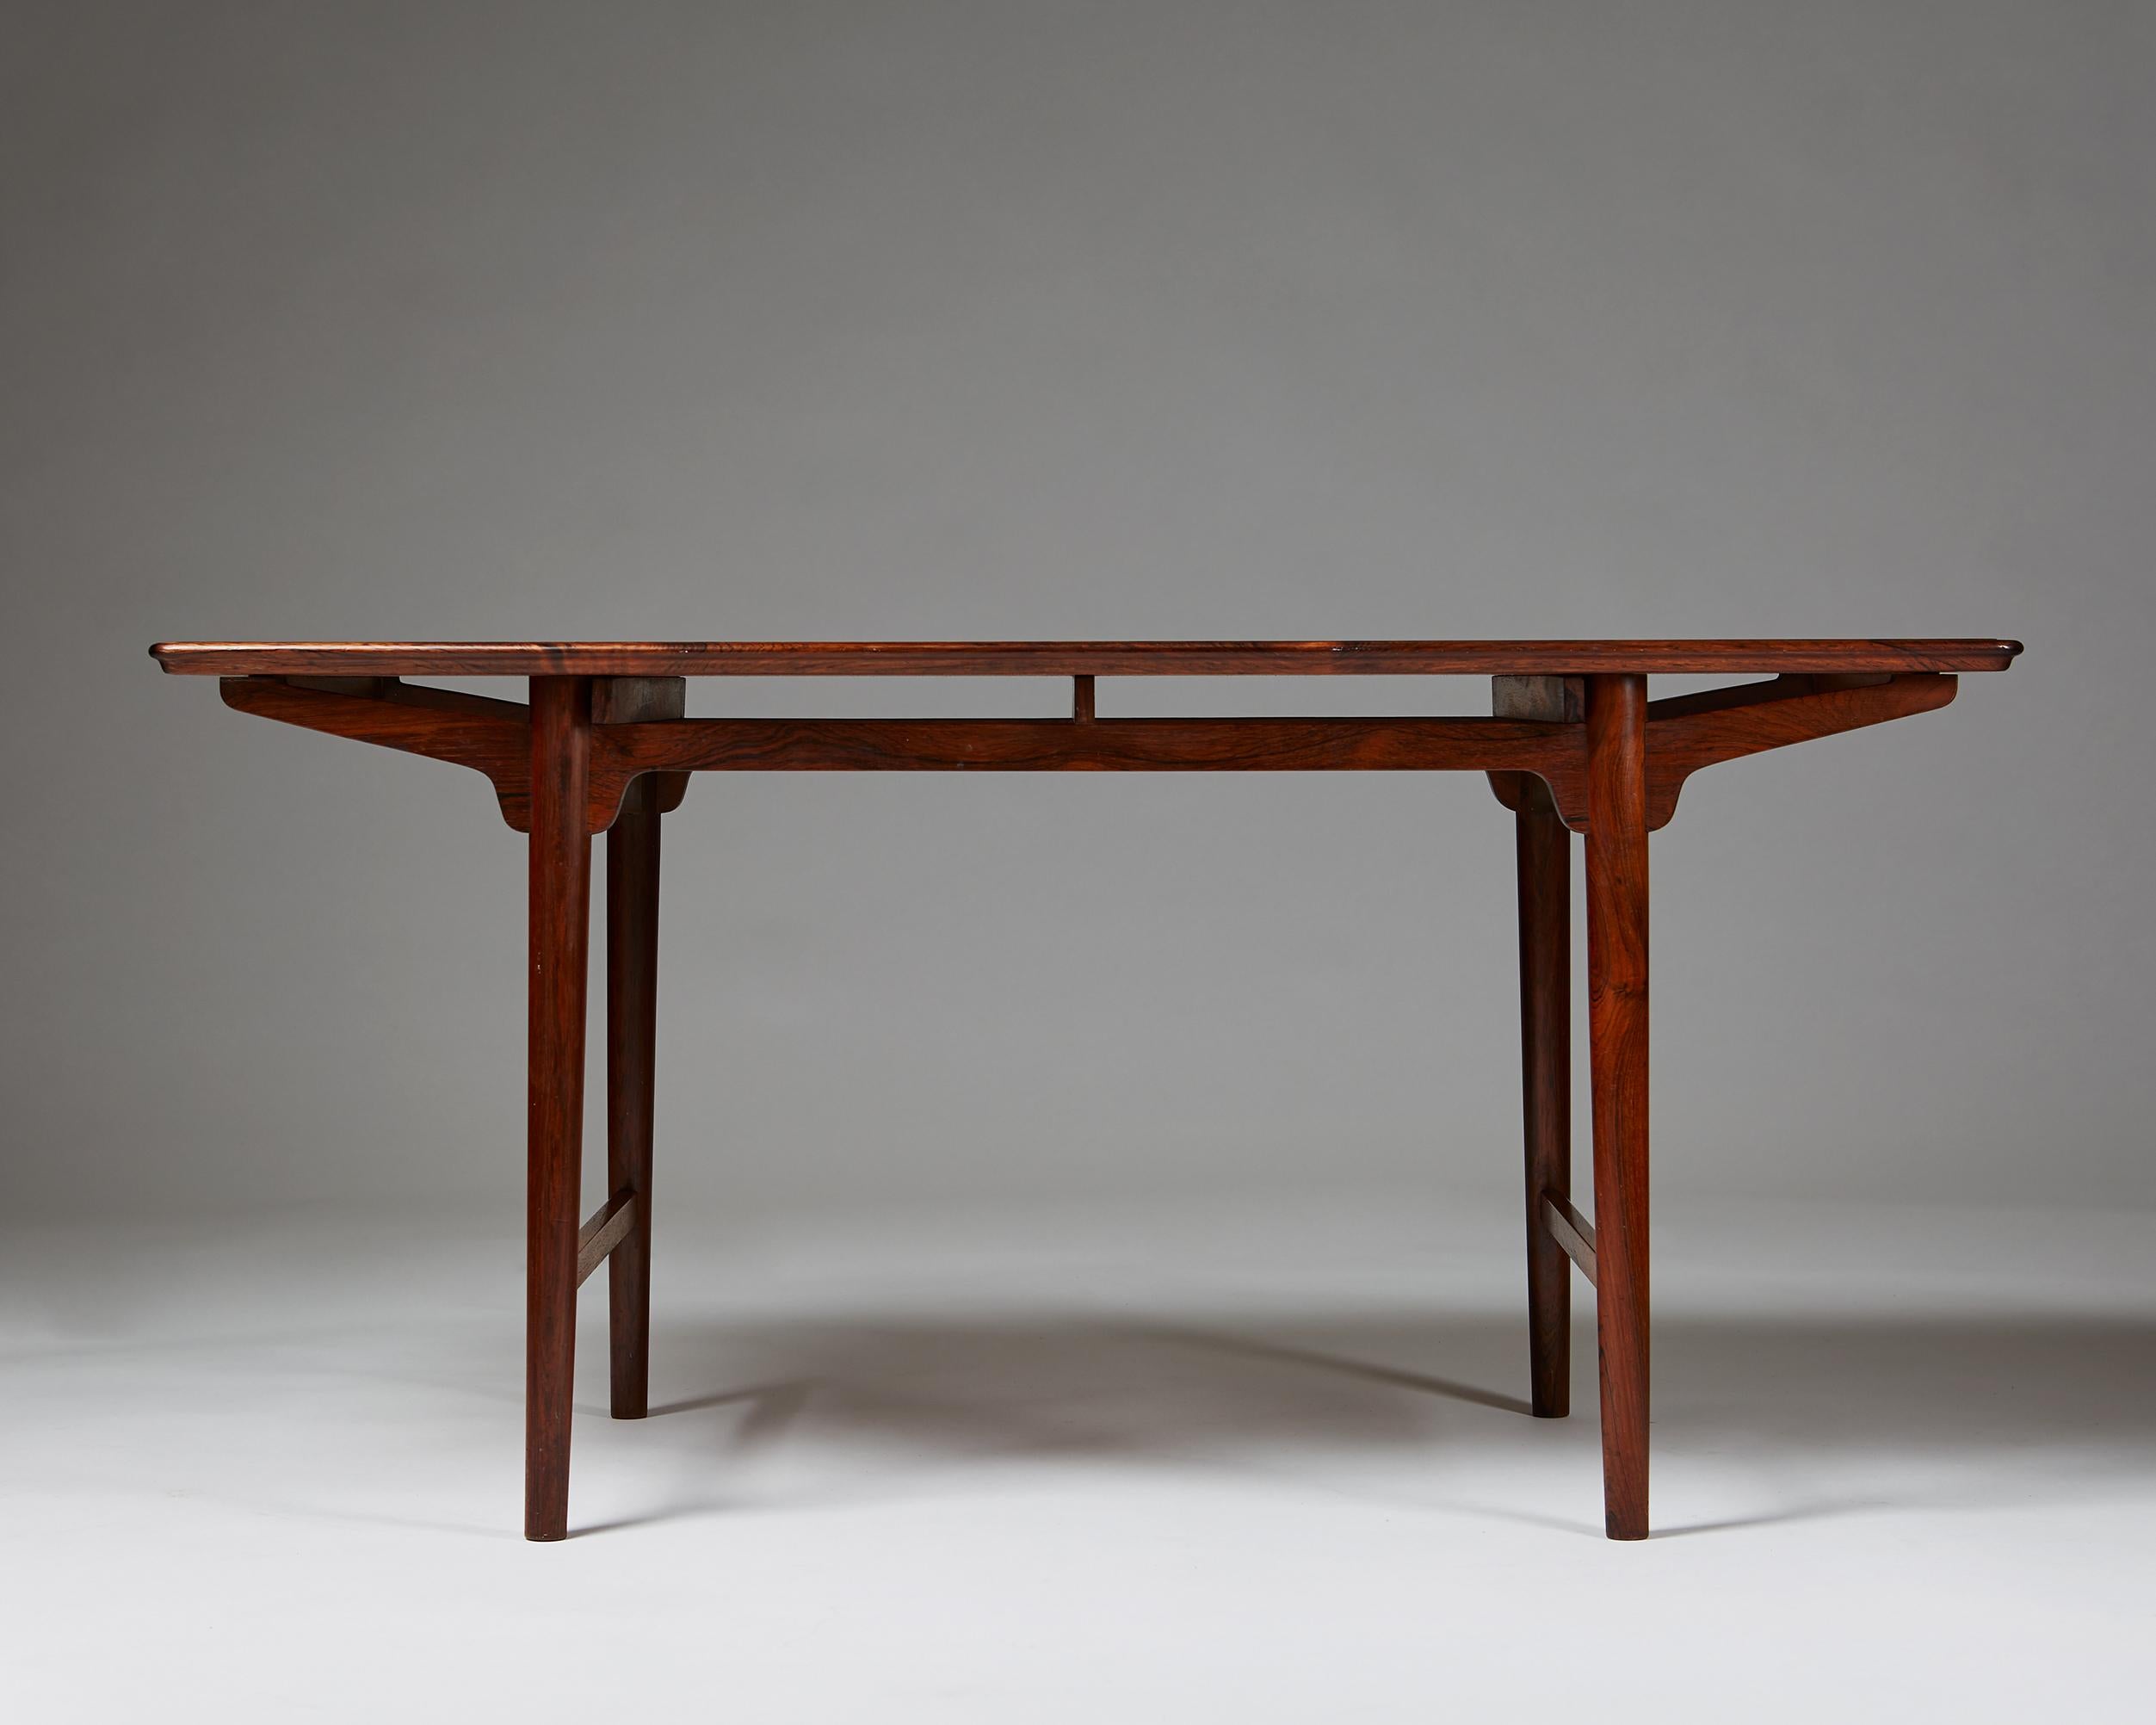 Coffee table designed by Frode Holm for Illums Bolighus,
Denmark. 1950's.

Rosewood.

Measurements:
H: 56 cm/ 22''
L: 121 cm/ 4'
W: 61 cm/ 24''